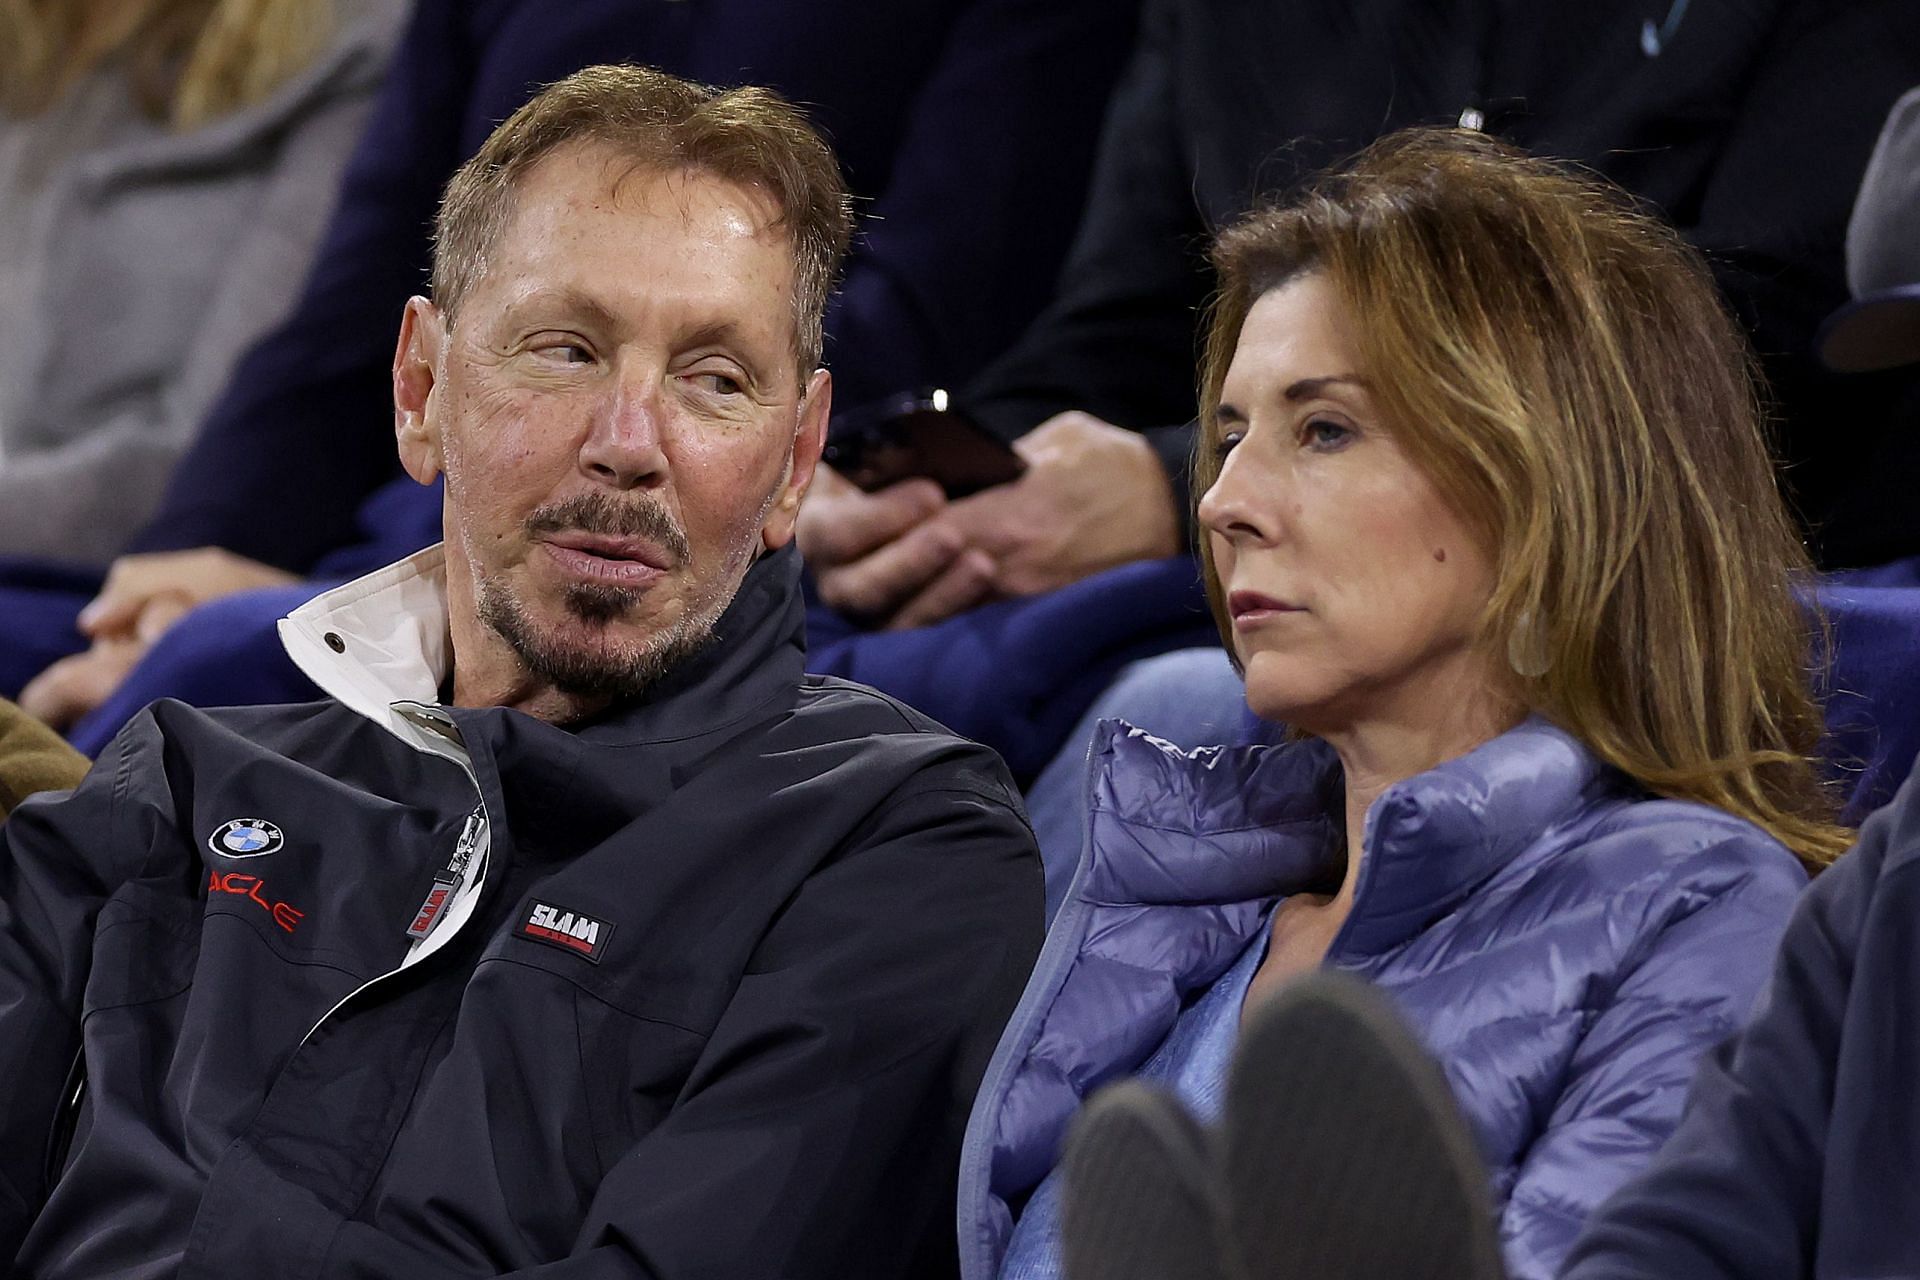 Monica Seles spotted in attendance at Indian Wells 2023, catches